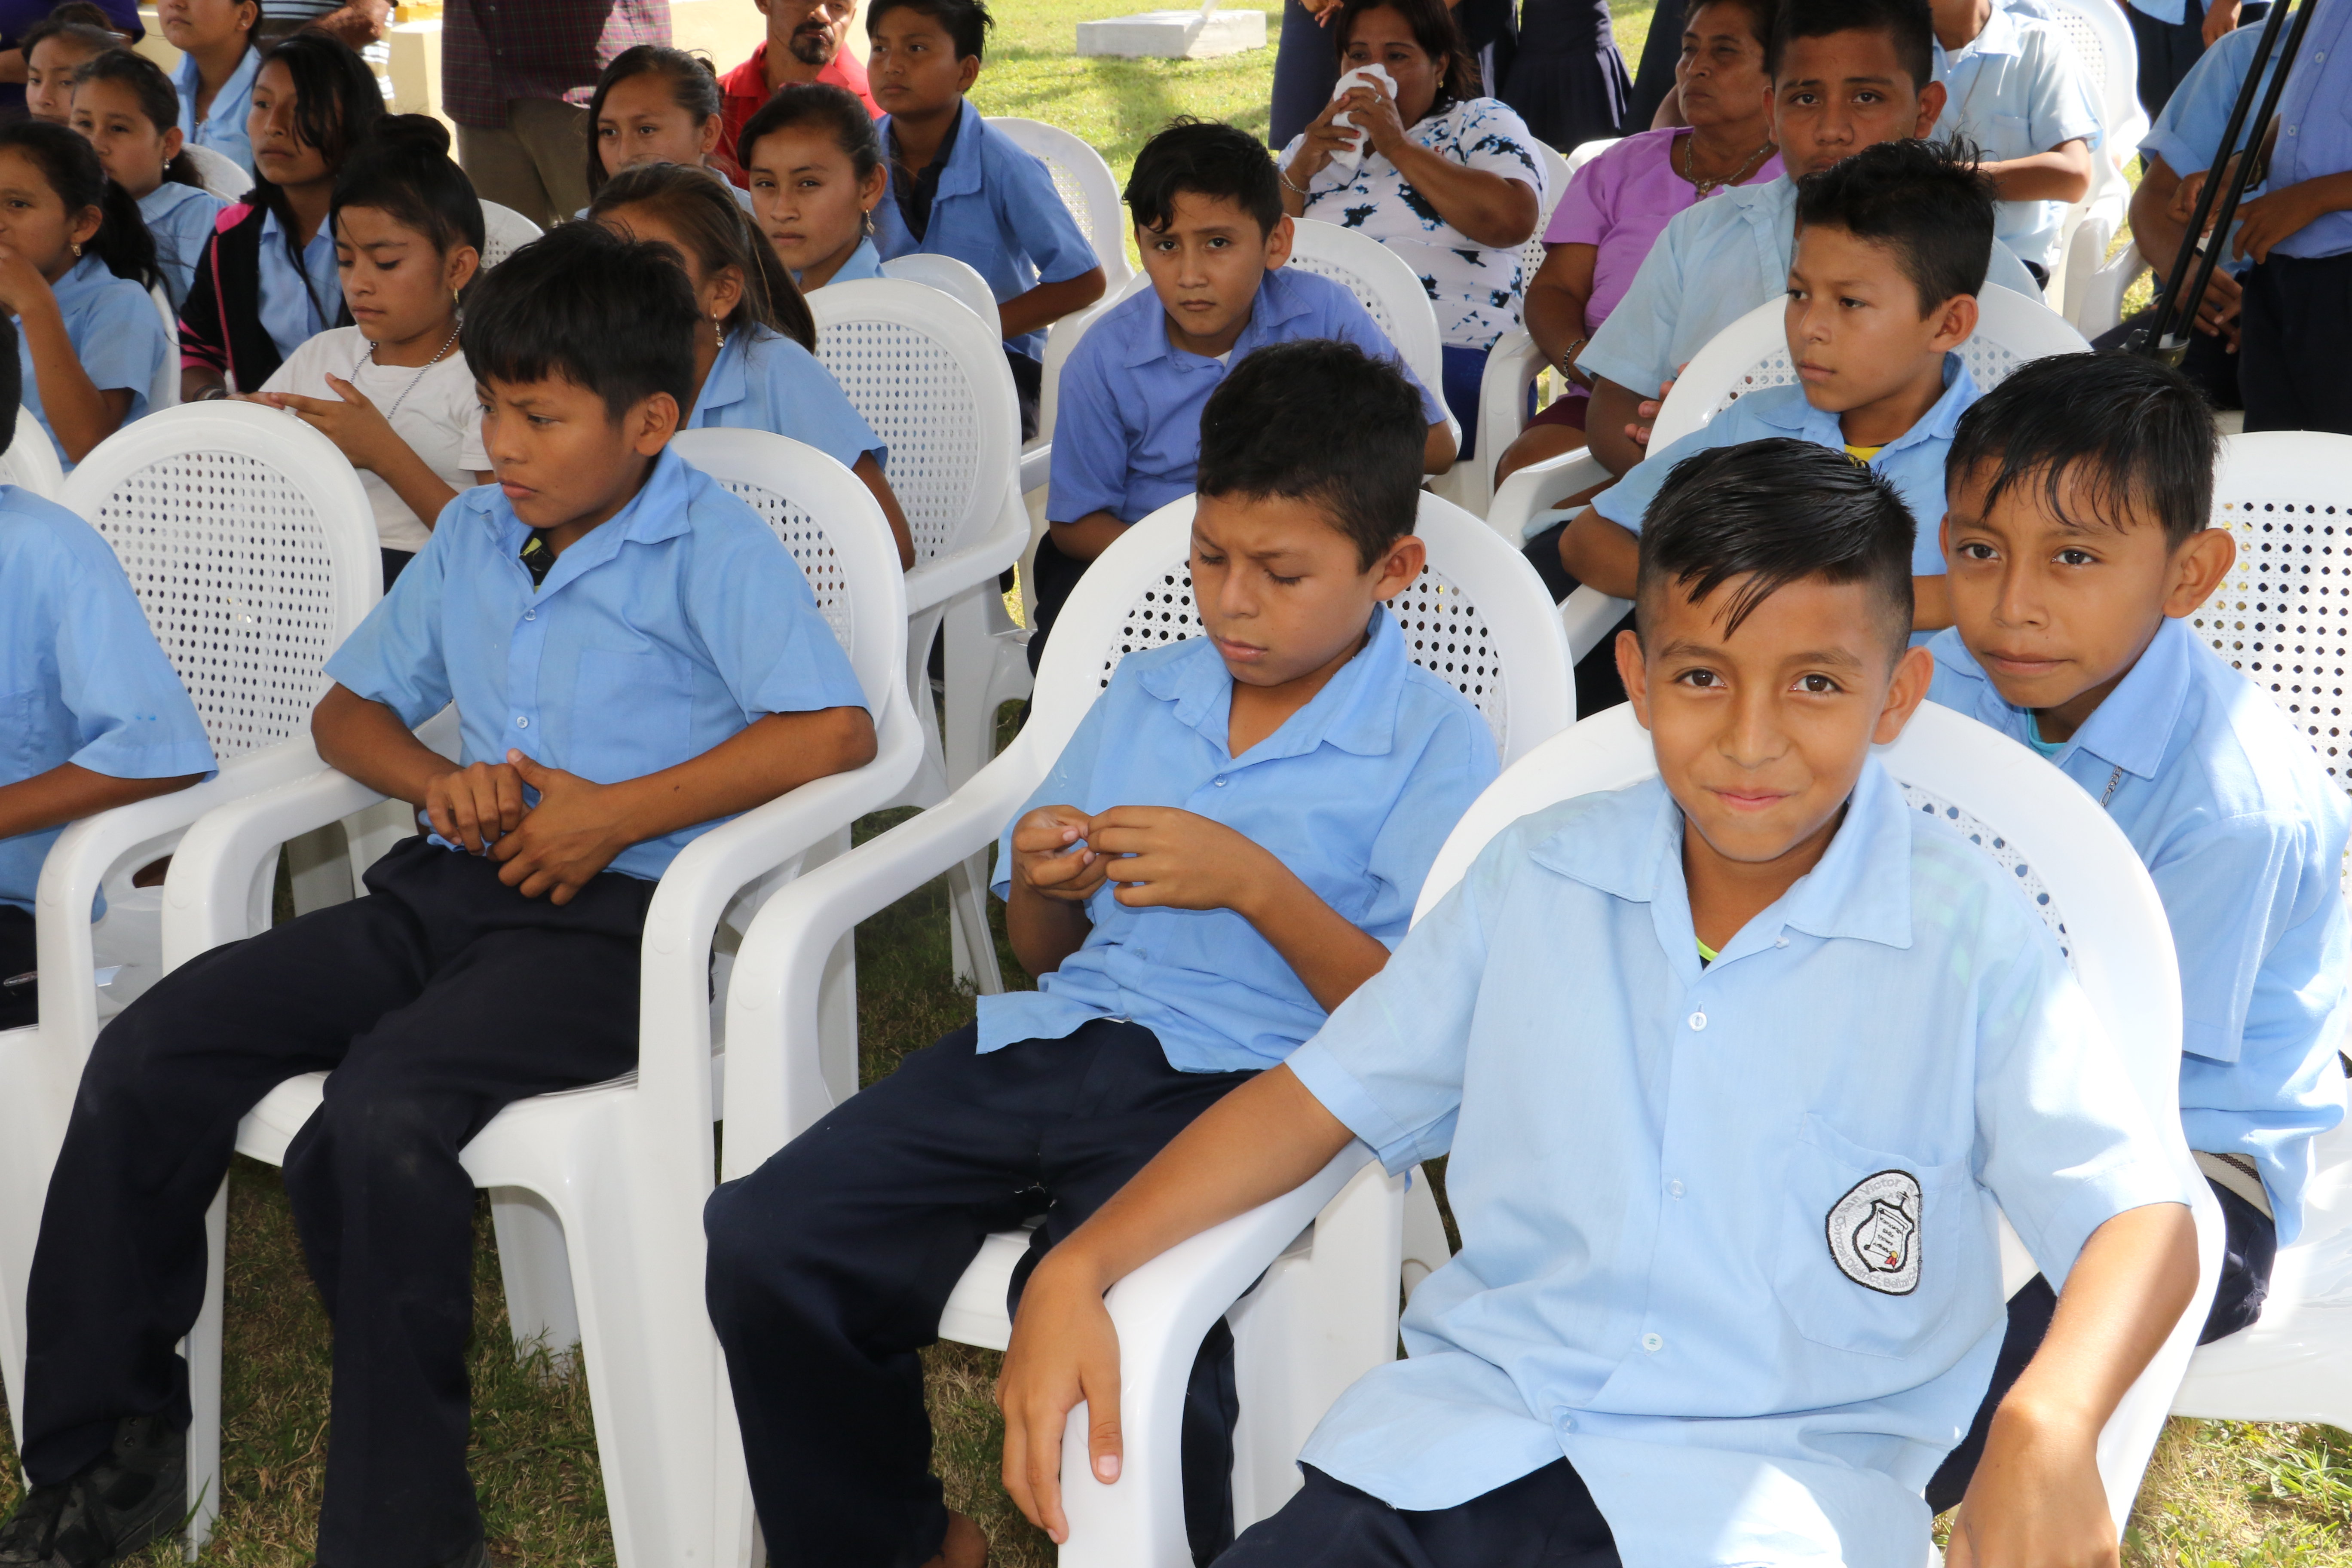 Students from the Village of San Victor attend the inauguration of the rehabilitated water system that will provide their school with access to safe water.